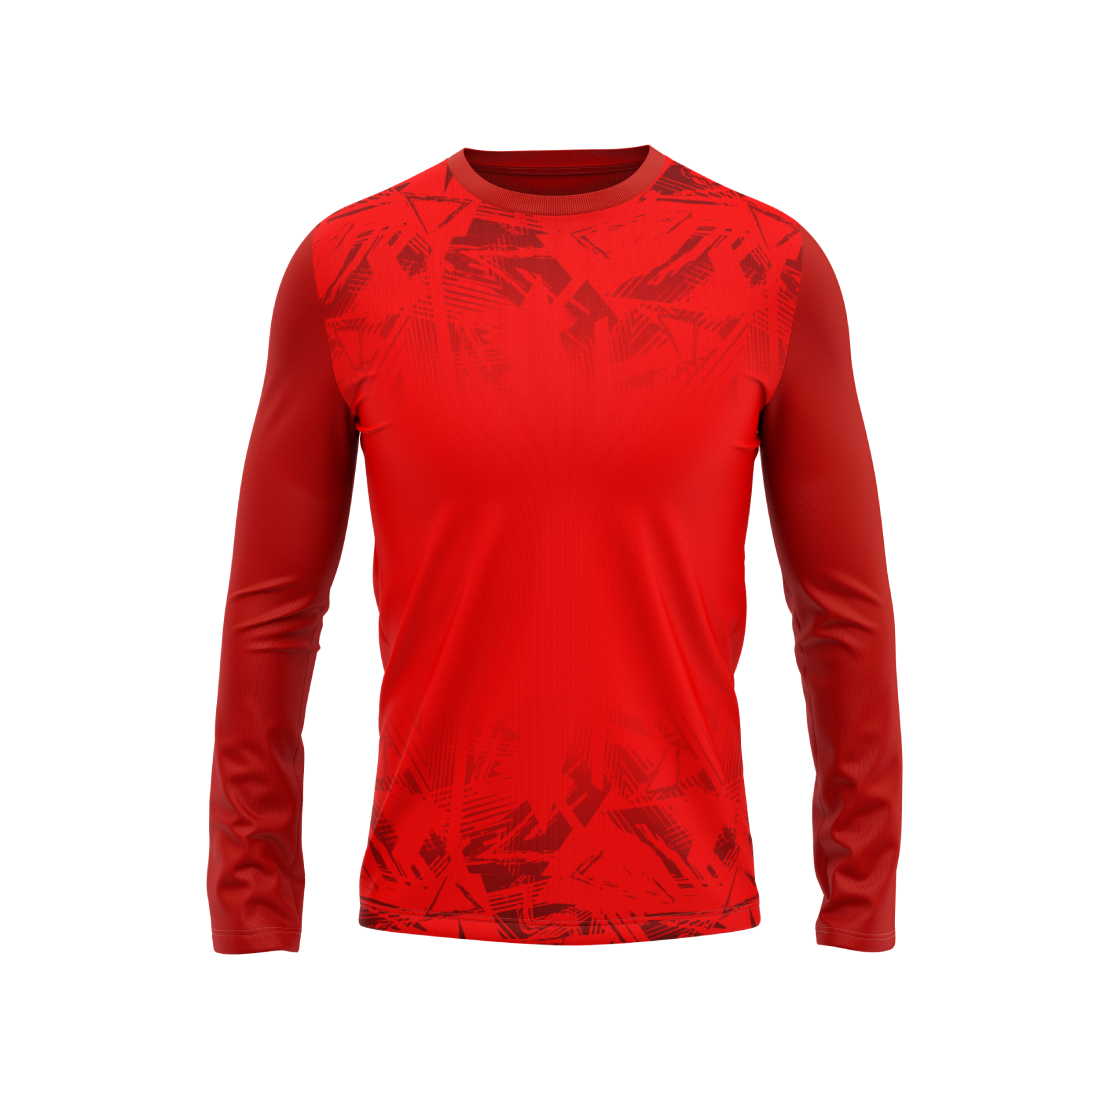 Round Neck Fullsleeve Printed Jersey Red NP0062